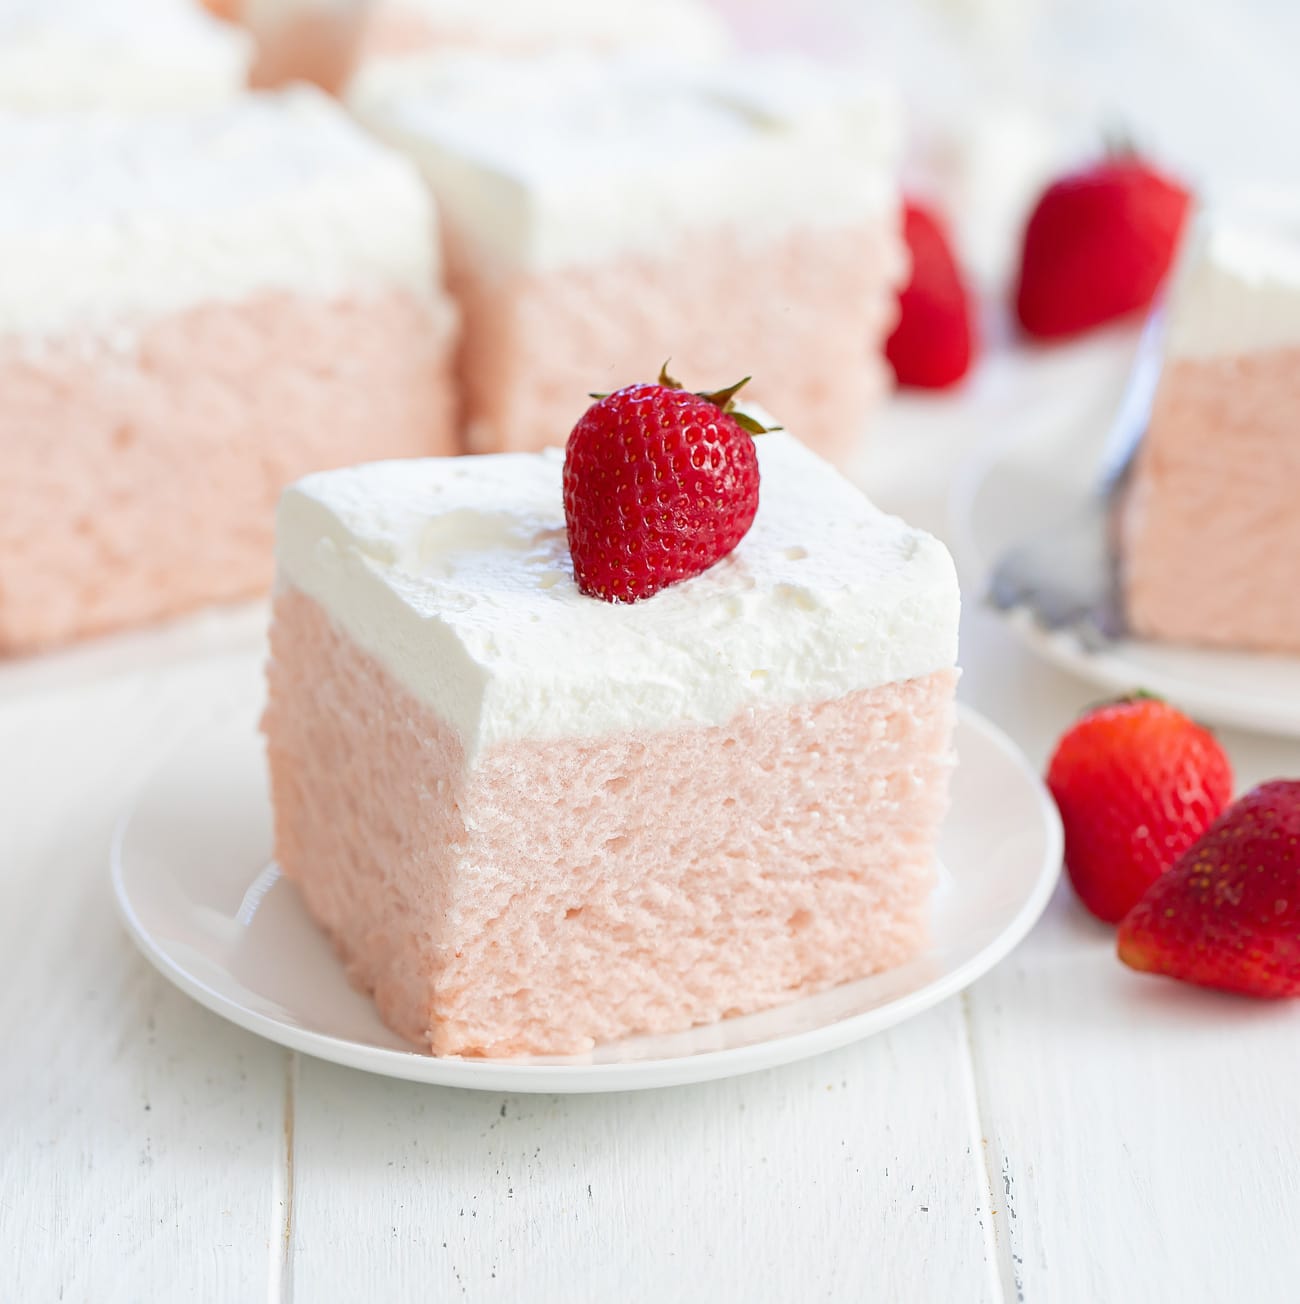 Fresh Strawberry Cake - The flavours of kitchen